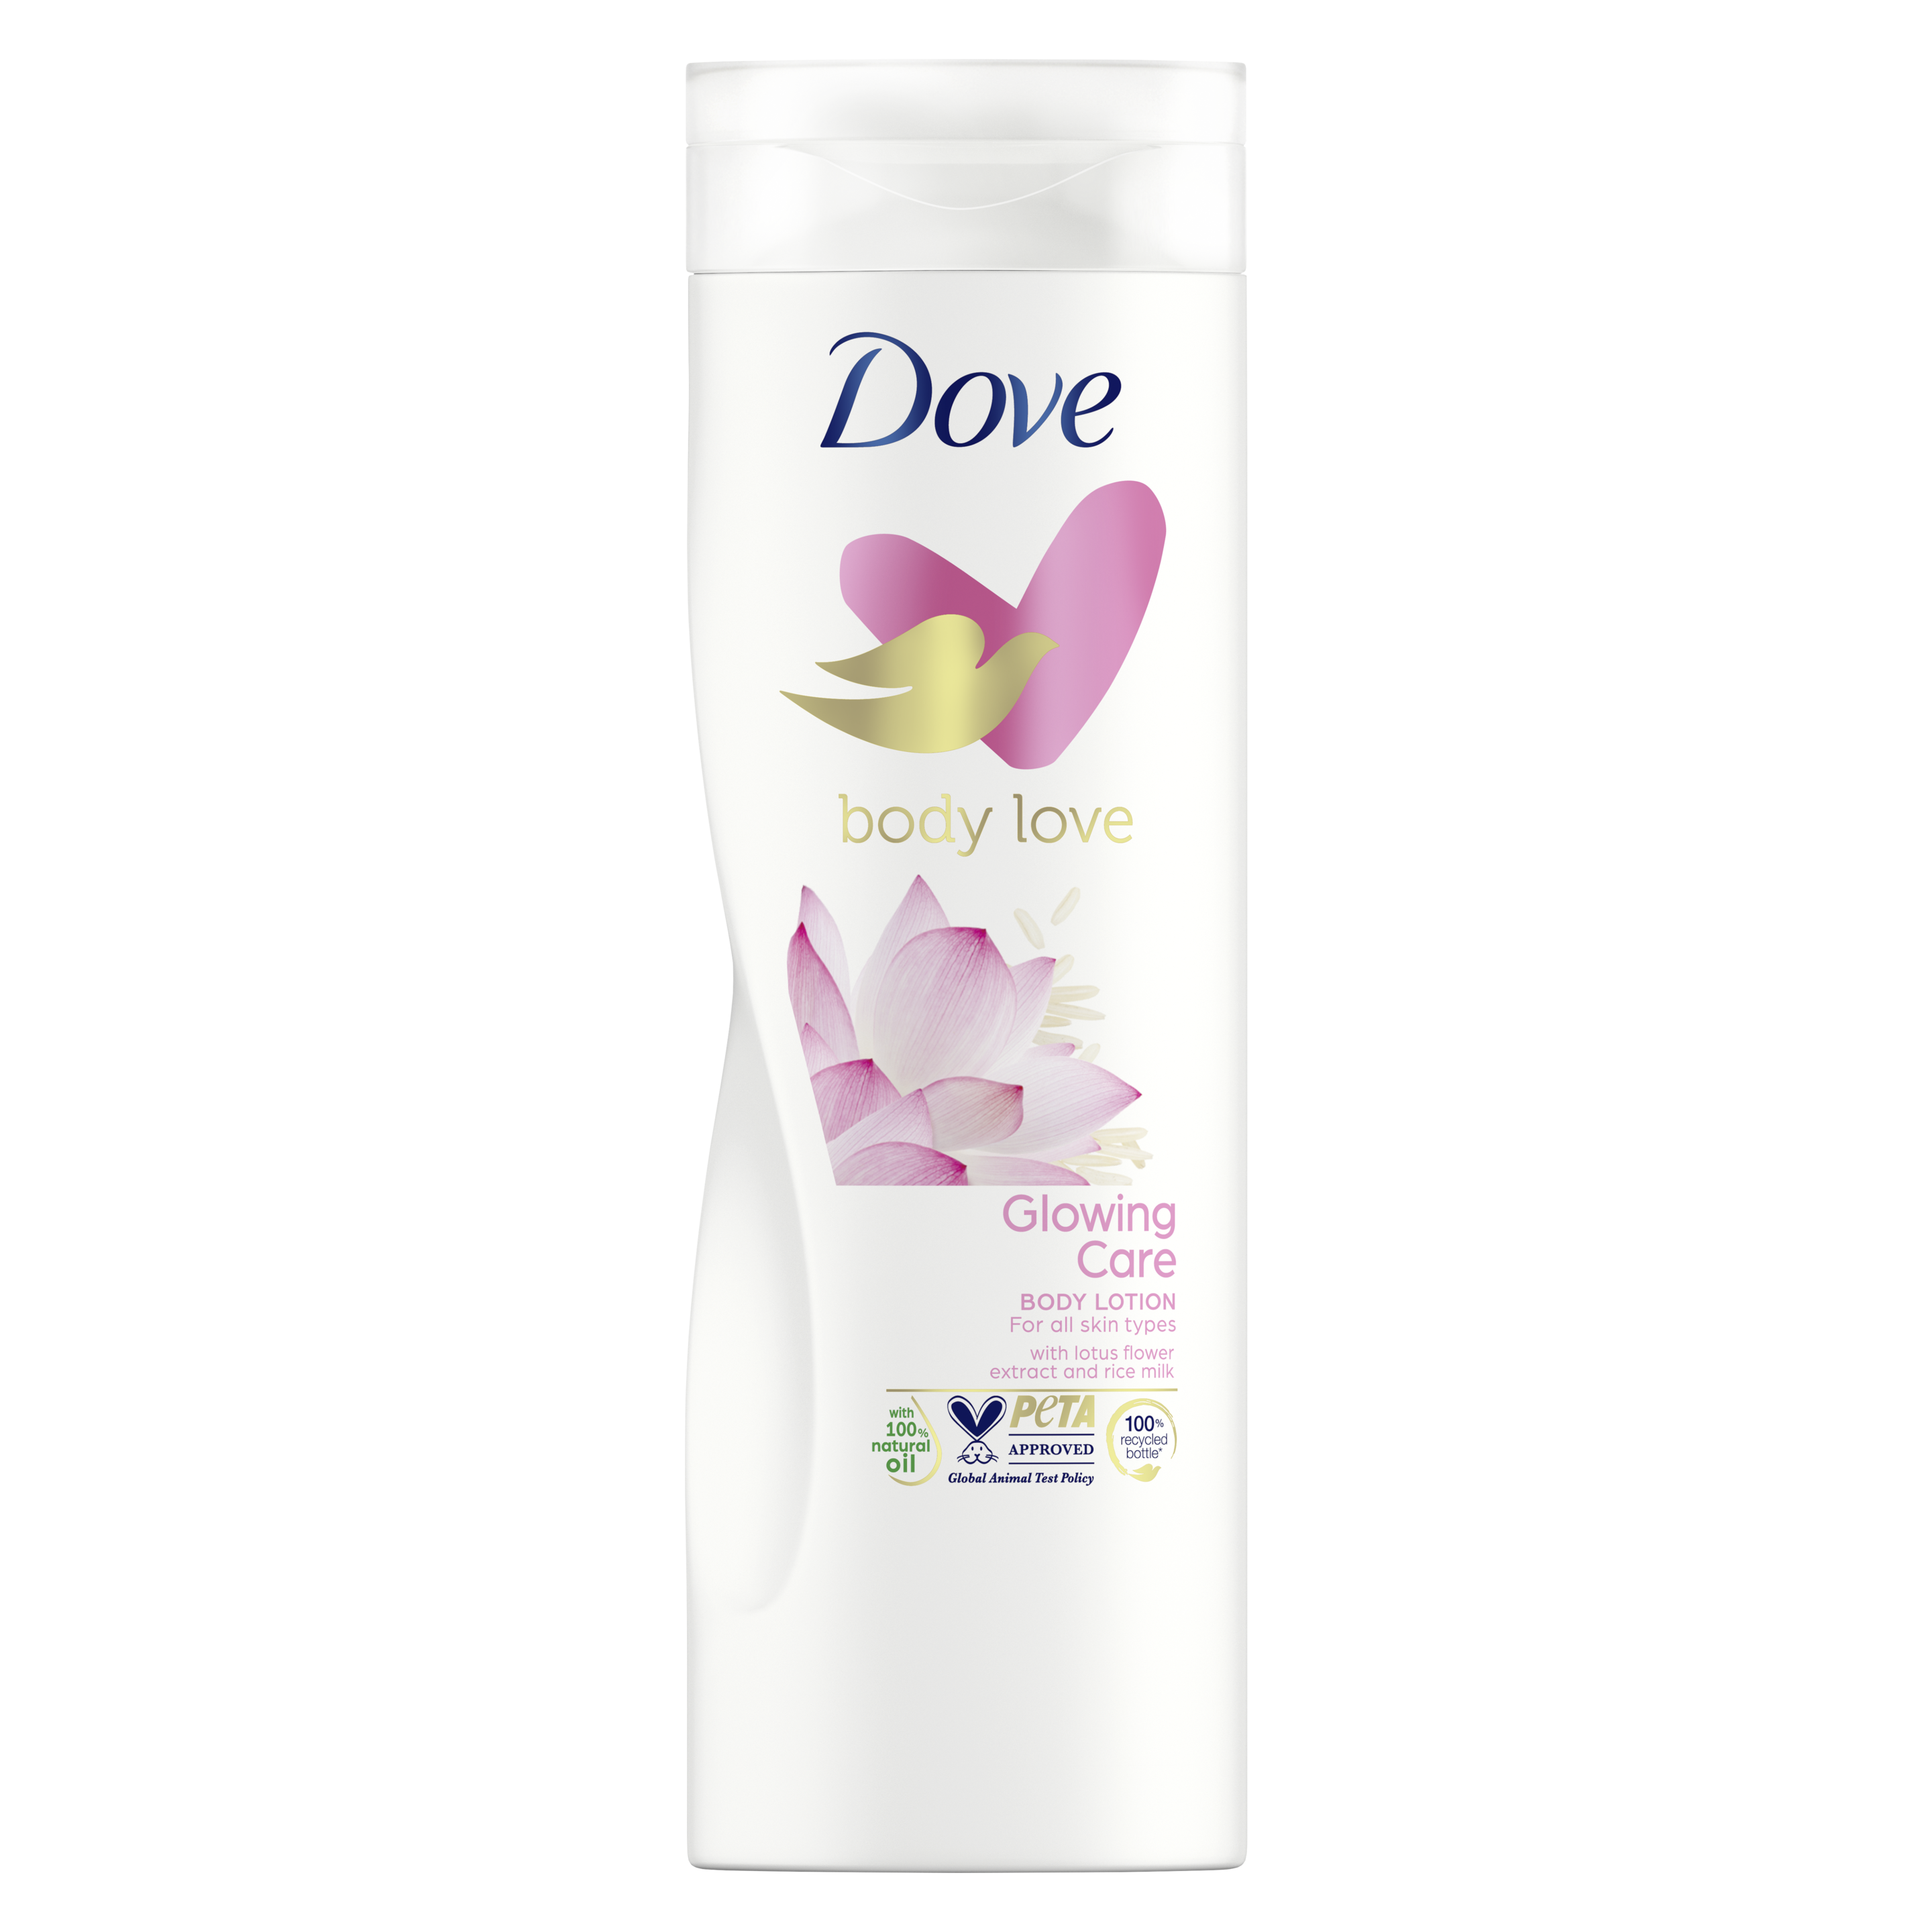 Body Love Glowing Care Body Lotion